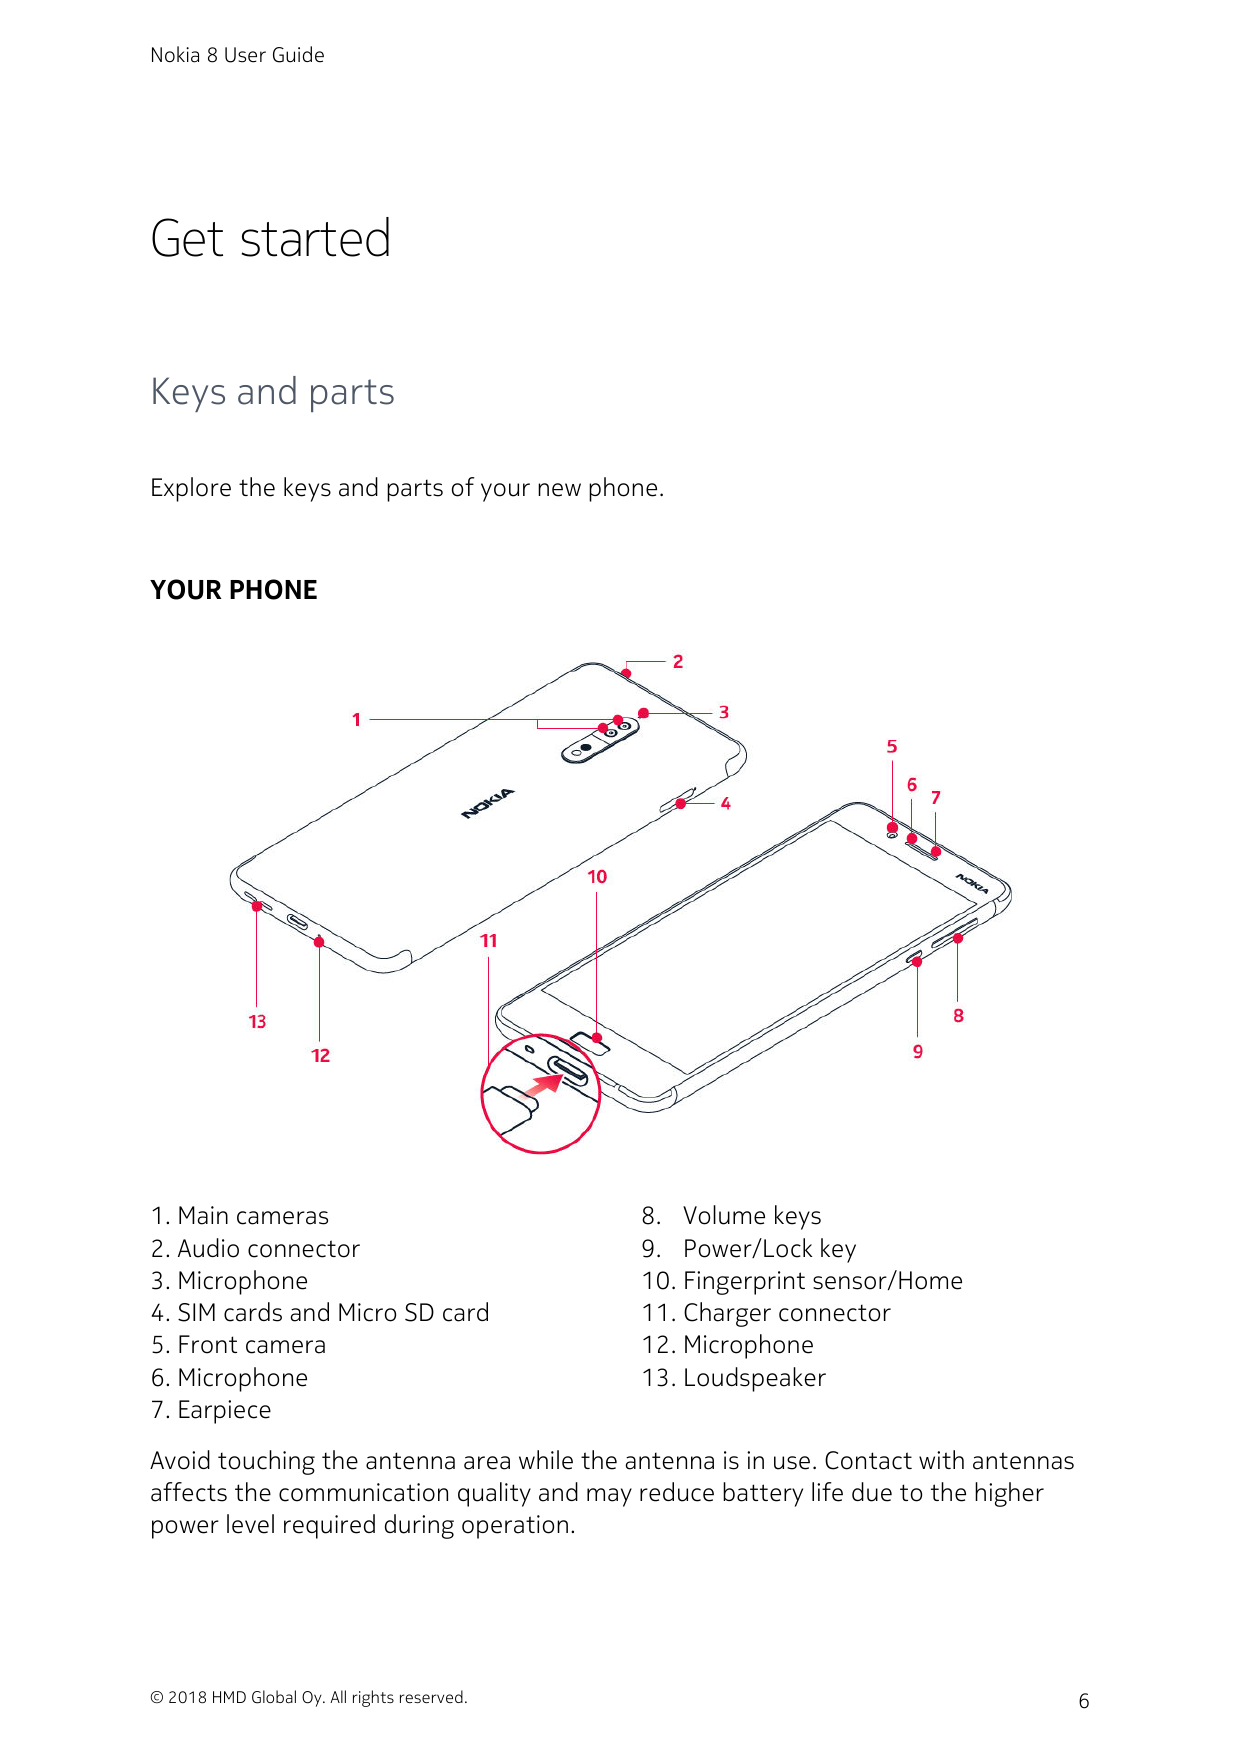 Nokia 8 User GuideGet startedKeys and partsExplore the keys and parts of your new phone.YOUR PHONE1. Main cameras2. Audio connec